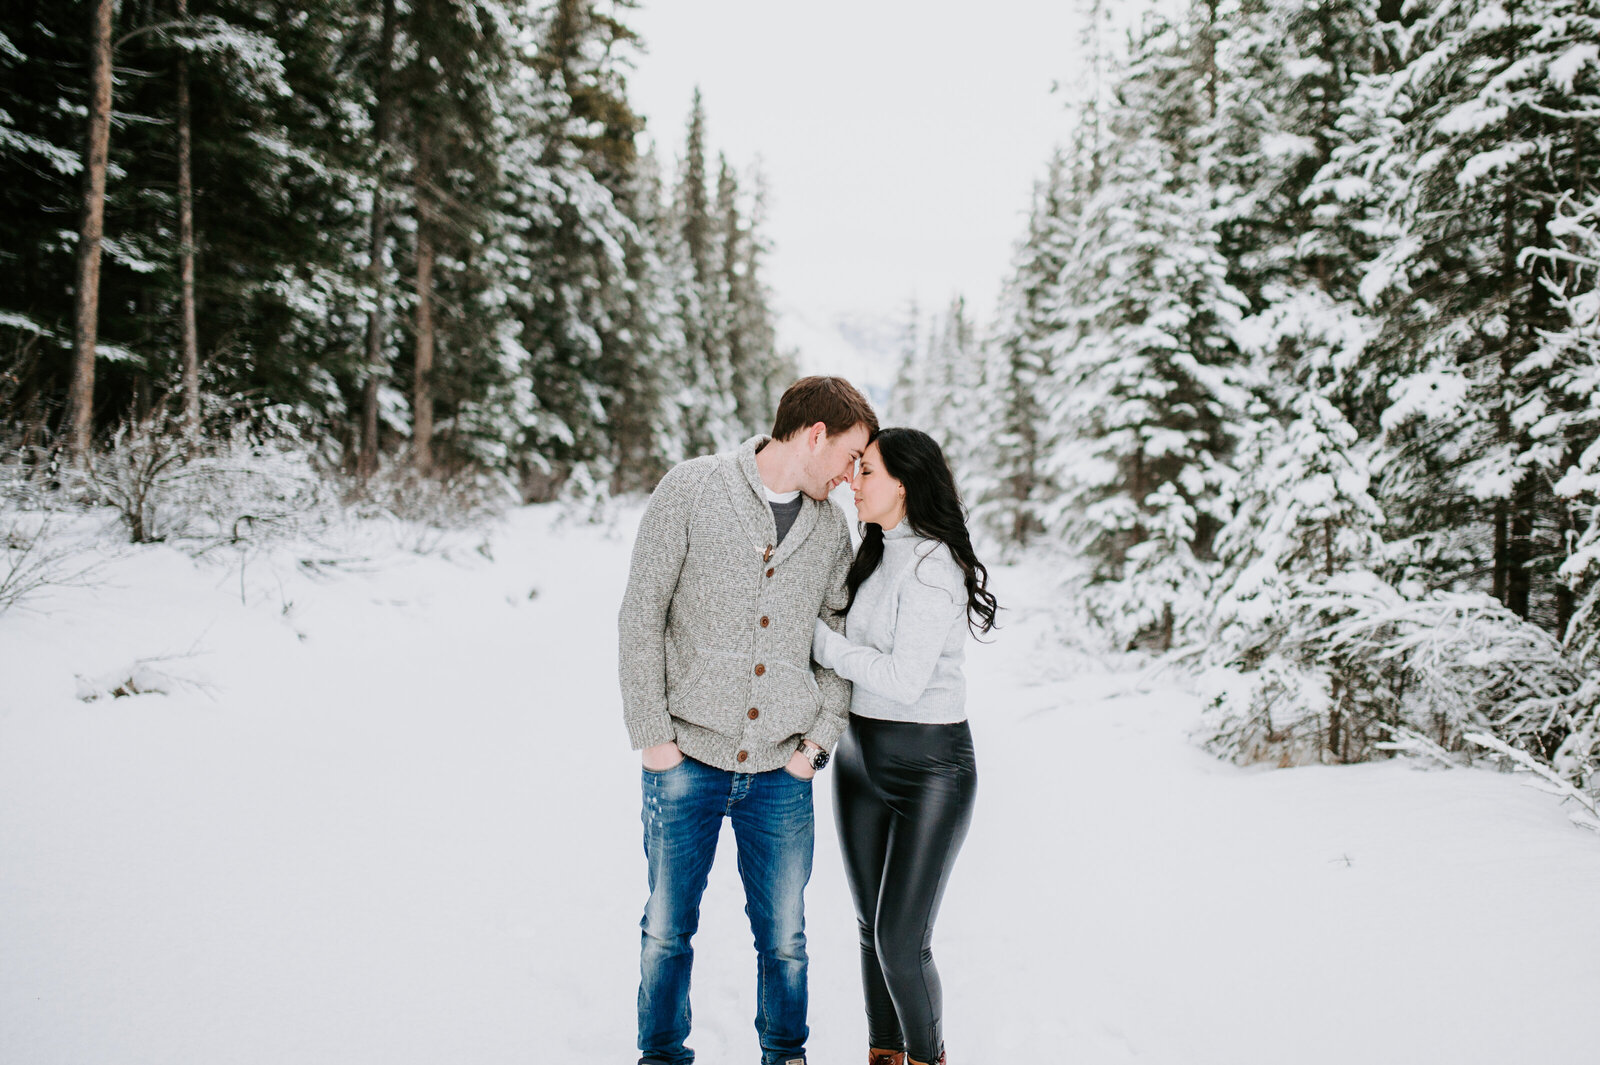 Winter Engagement Photos in the Mountains - Abraham Lake, AB